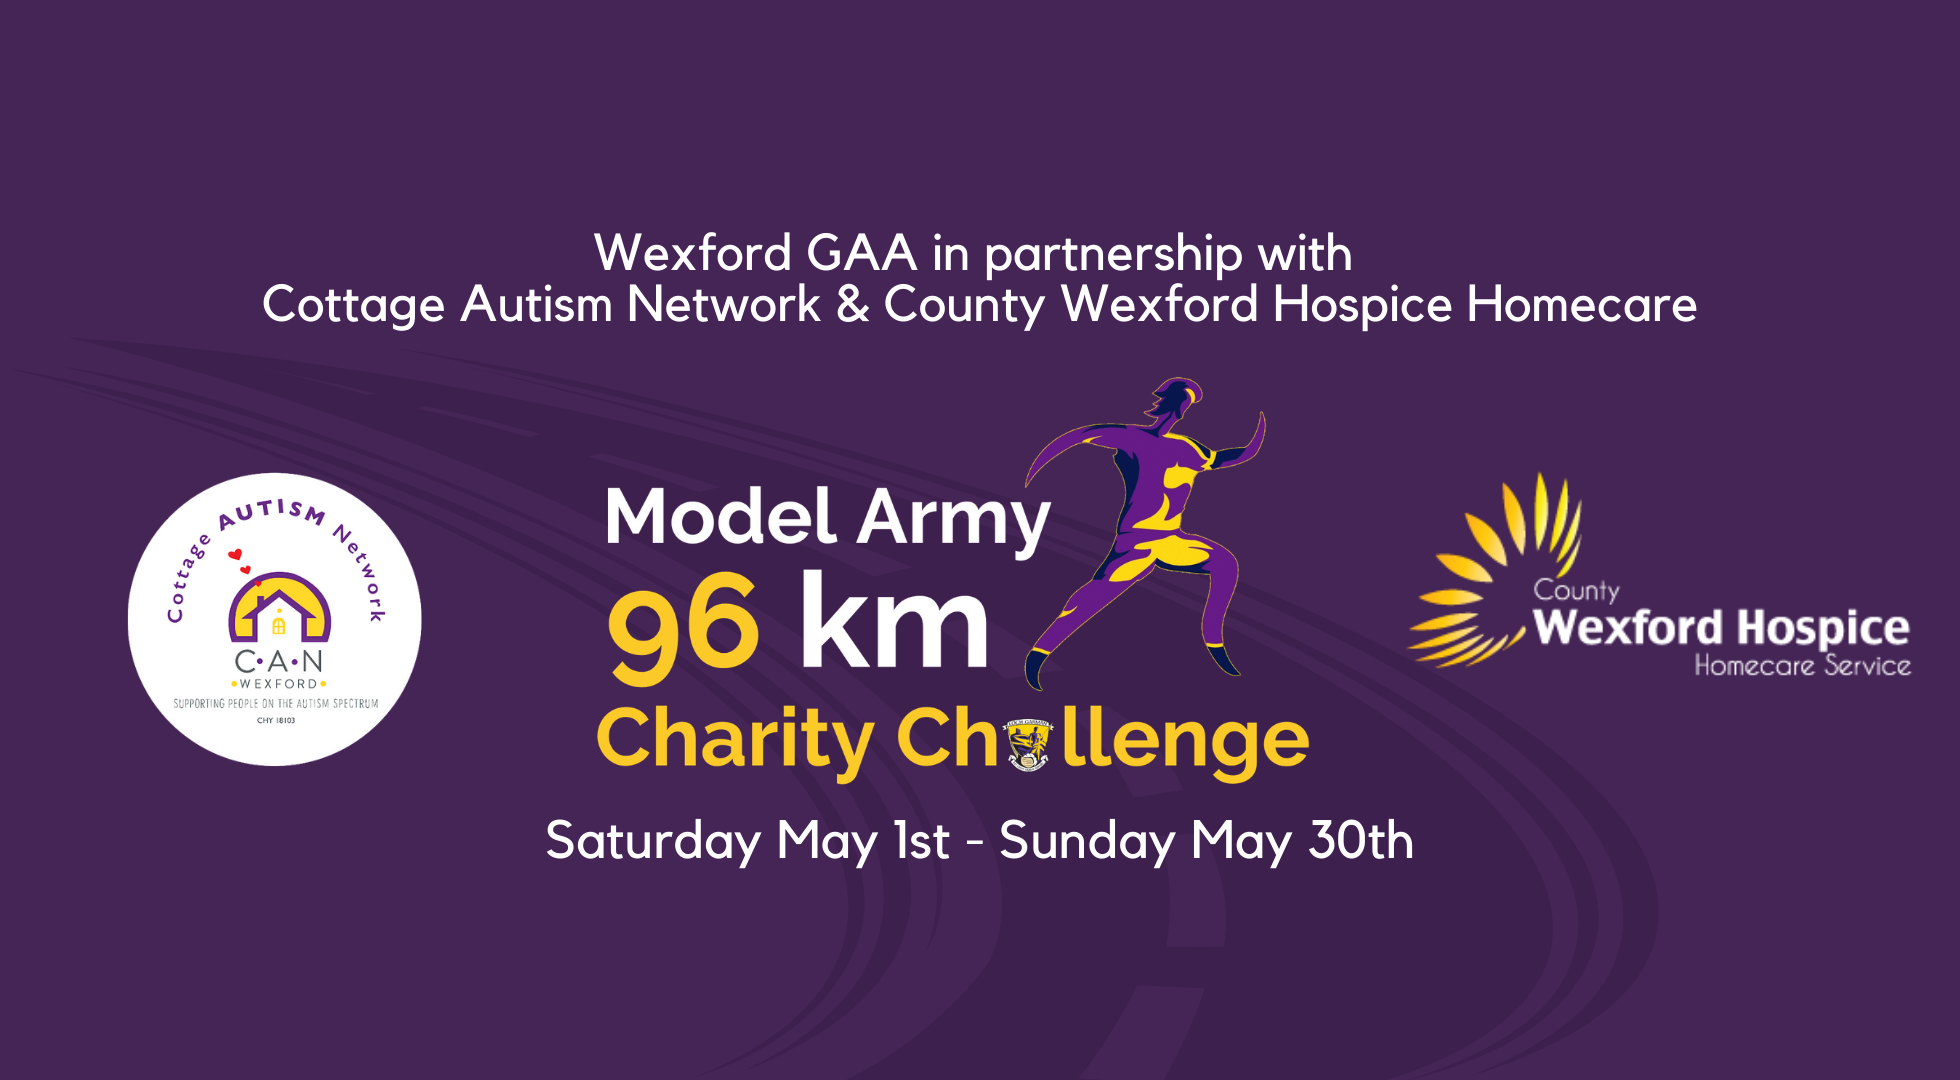 Model Army 96km Charity Challenge